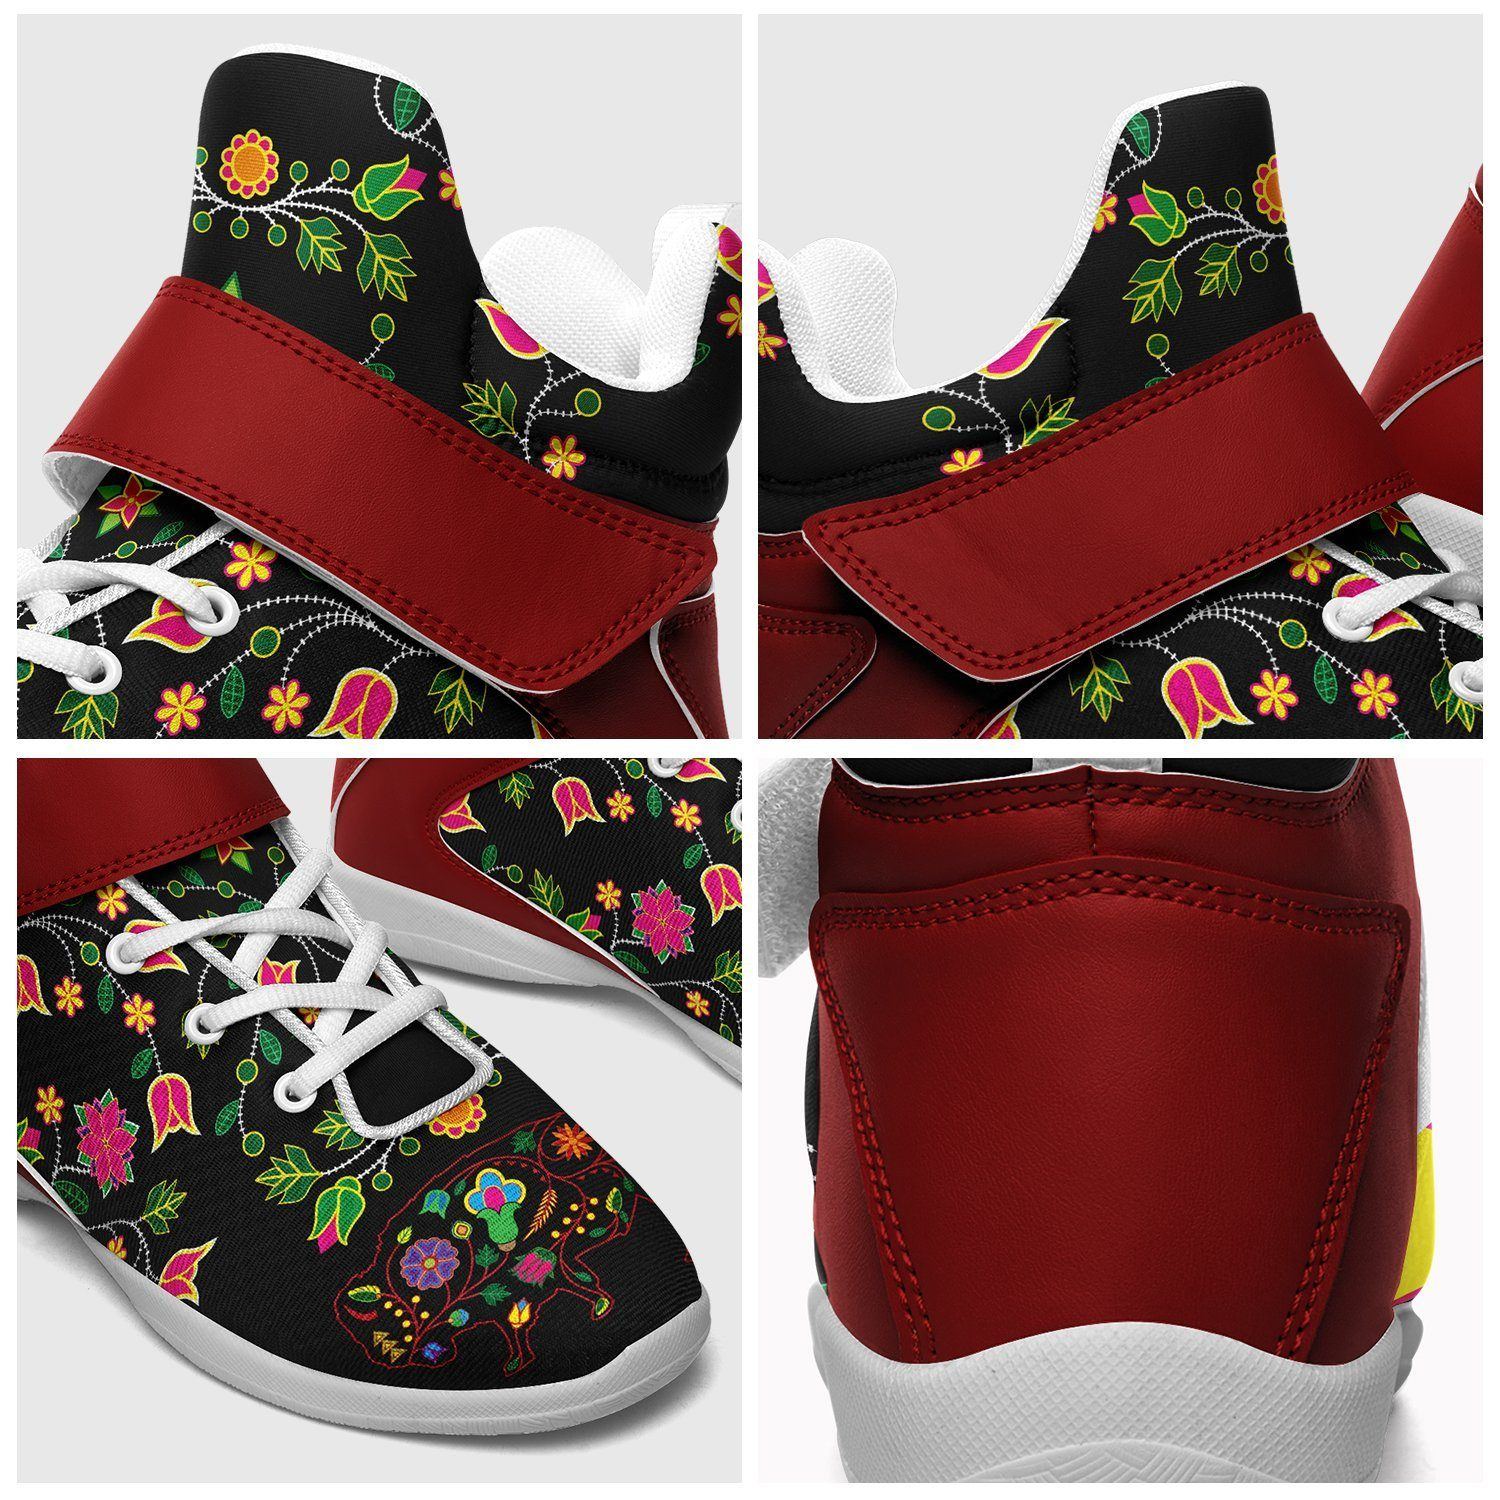 Floral Buffalo Ipottaa Basketball / Sport High Top Shoes - White Sole 49 Dzine 